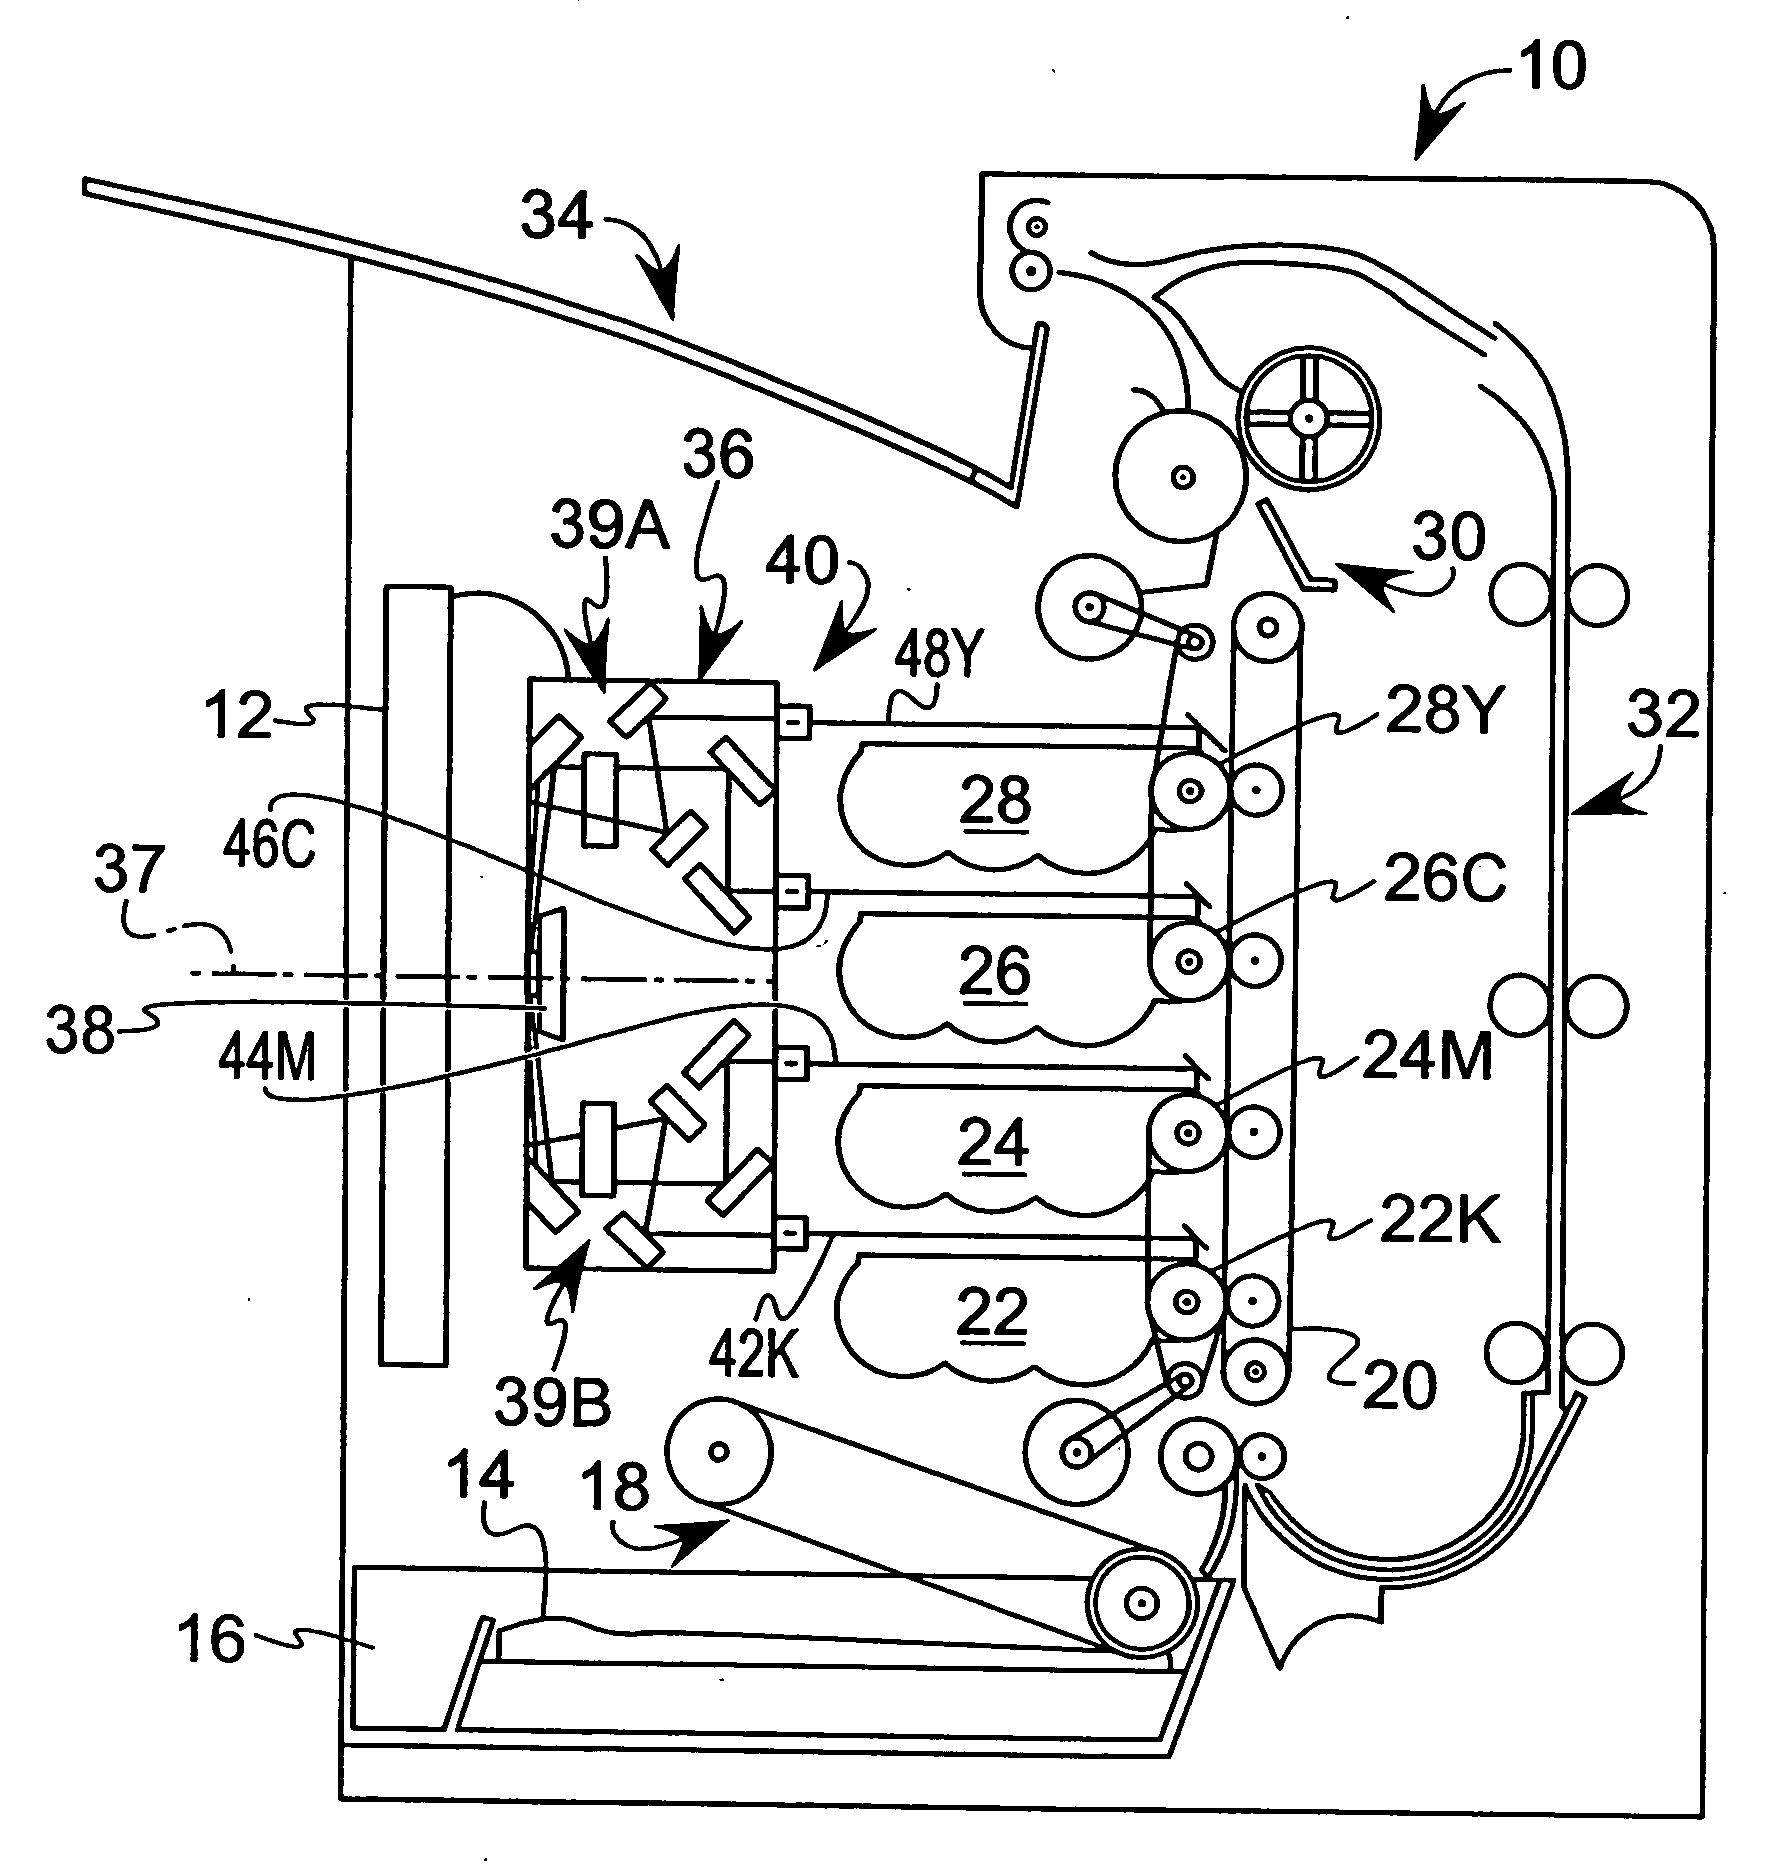 Collimation assembly with an adjustment bracket capable of flexing when receiving a light source